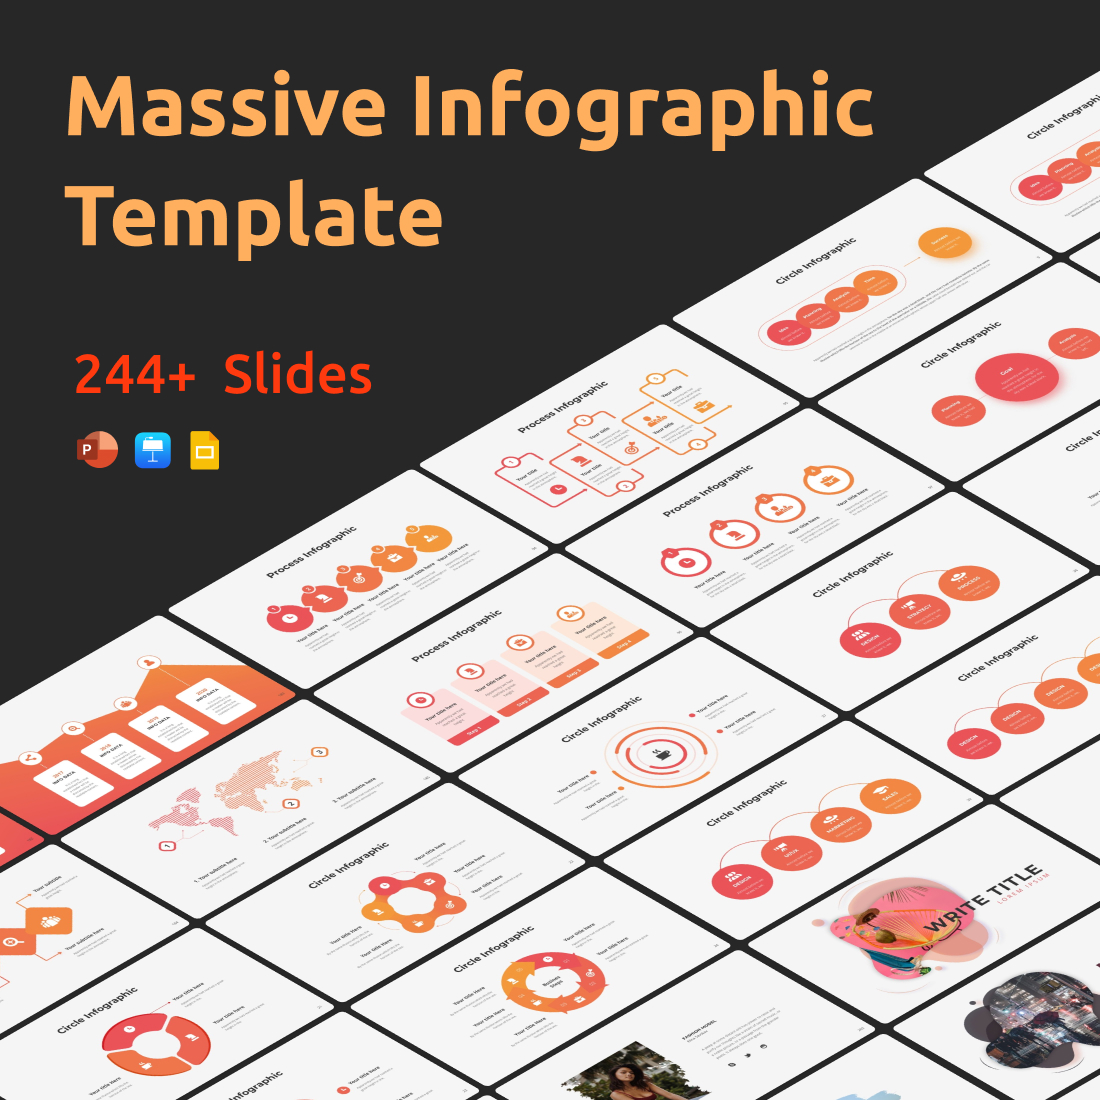 Massive Infographic Template main cover.